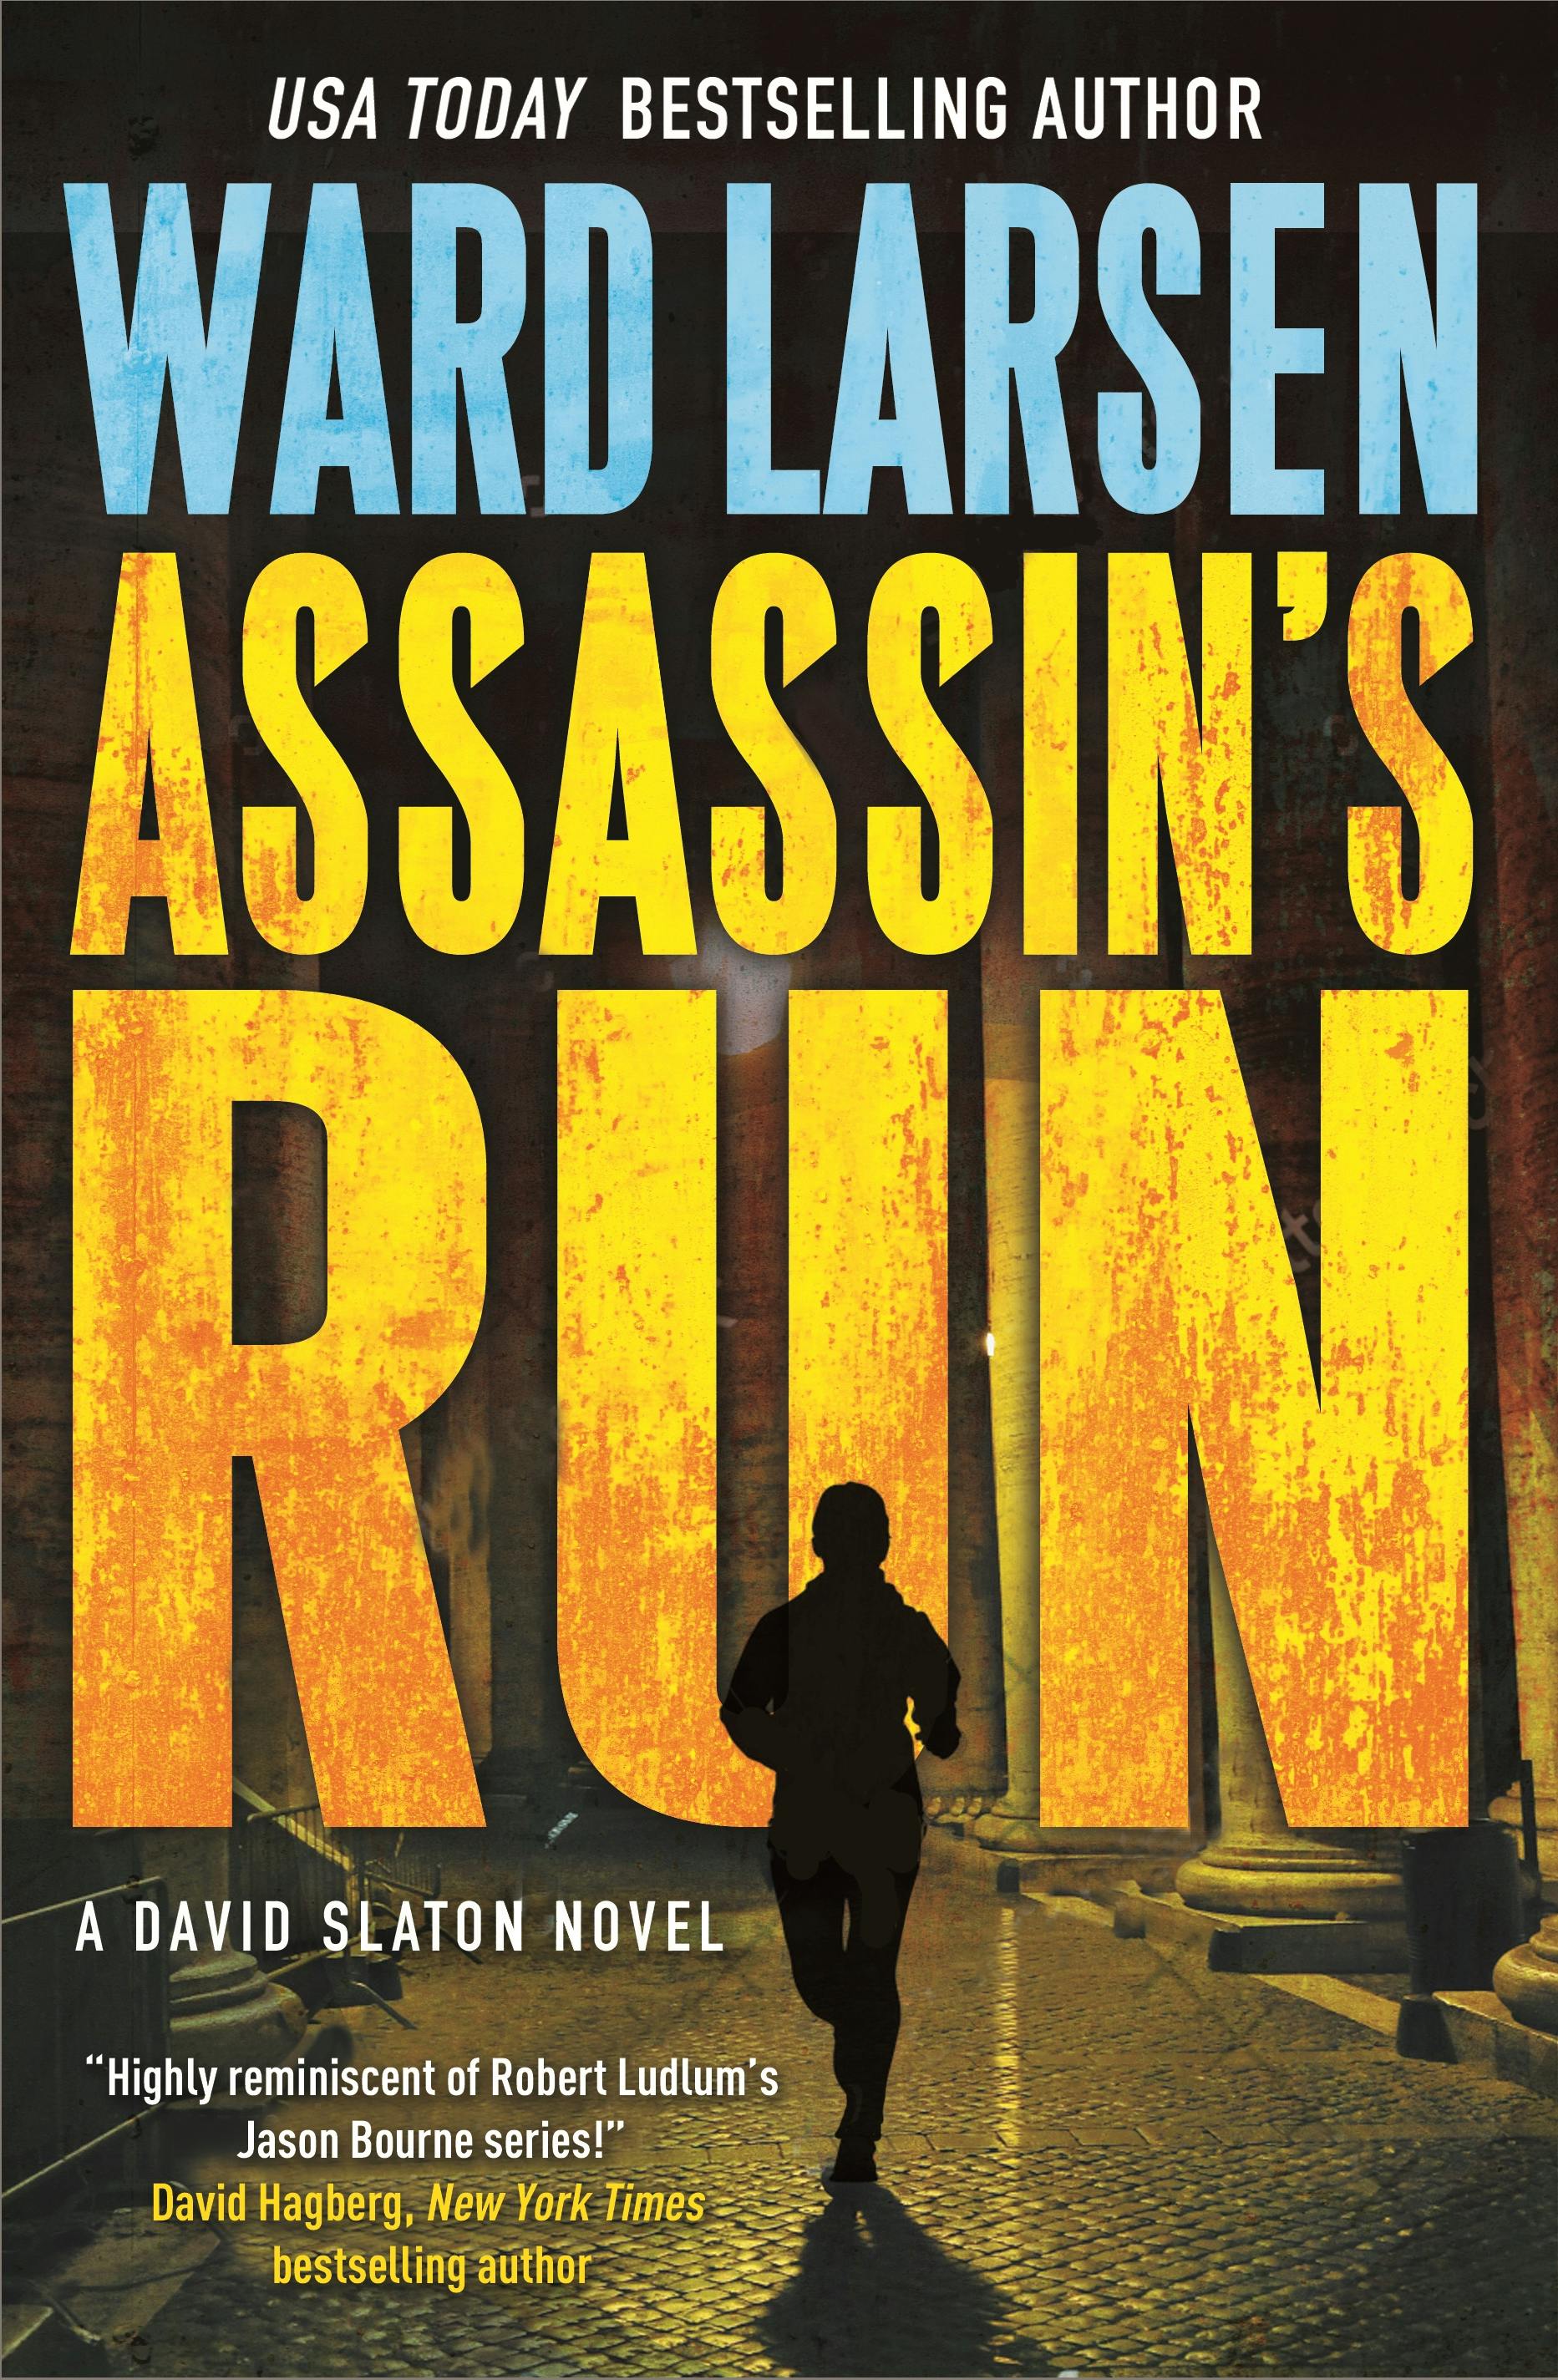 Cover for the book titled as: Assassin's Run